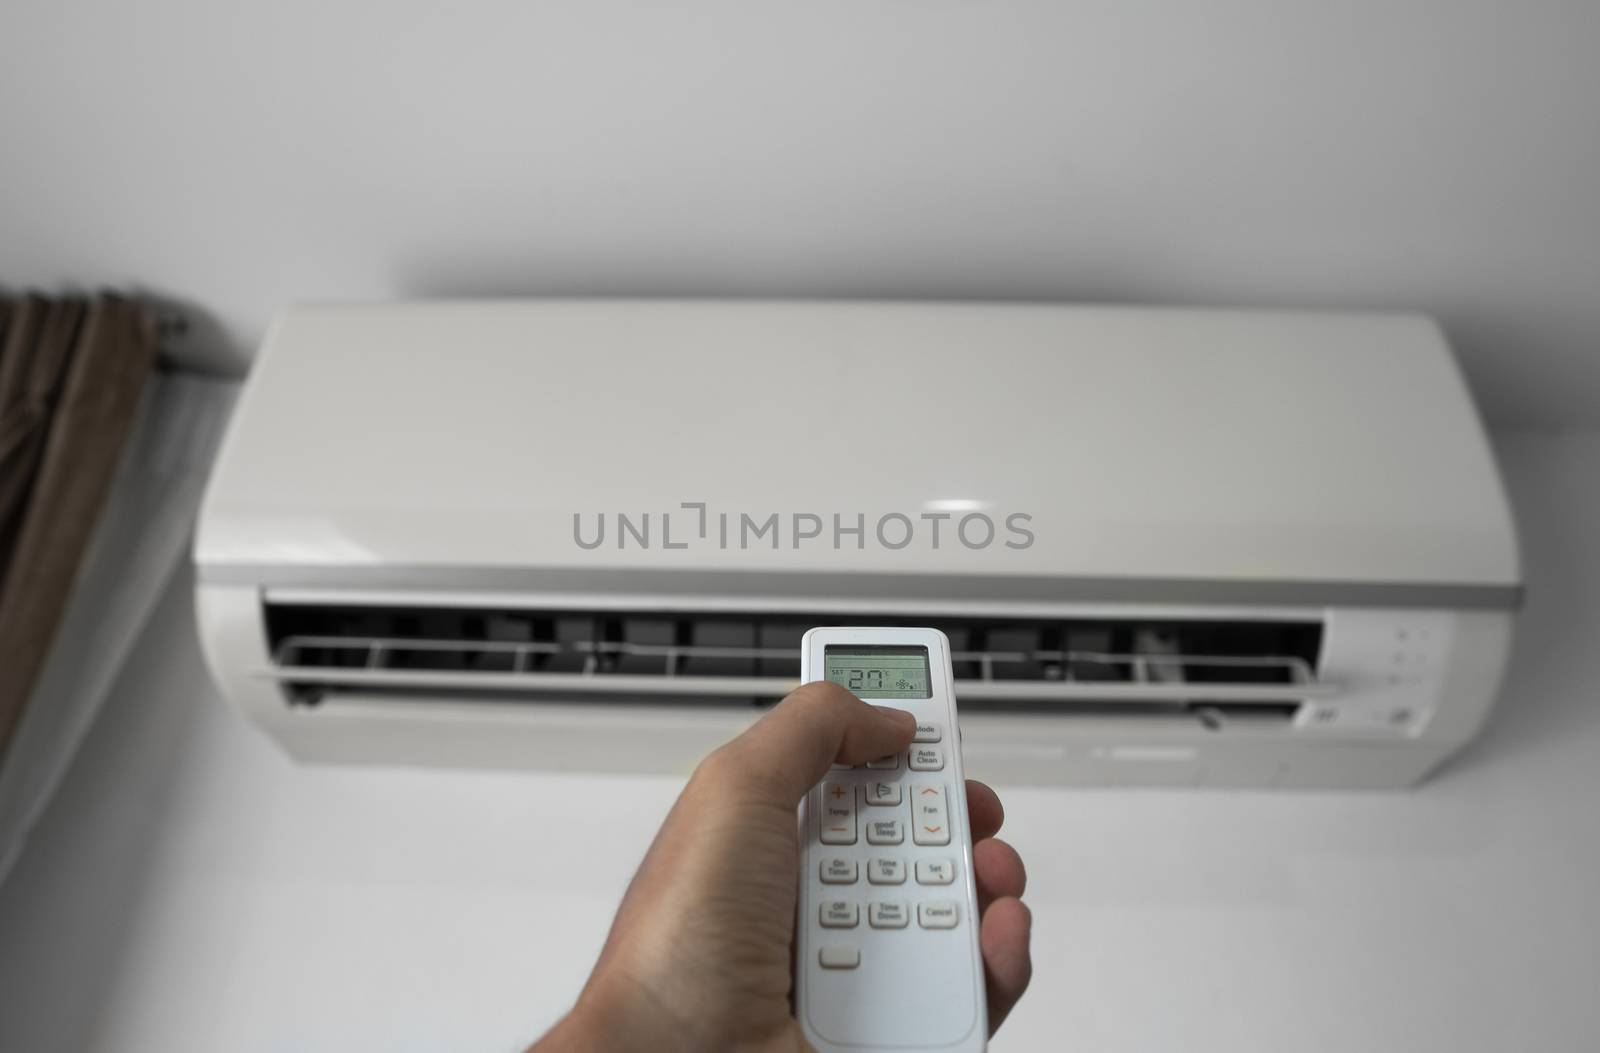 Man's hand using remote controler. Hand holding rc and adjusting temperature of air conditioner mounted on a white wall. Indooor comfort temperature. Health concepts and energy savings